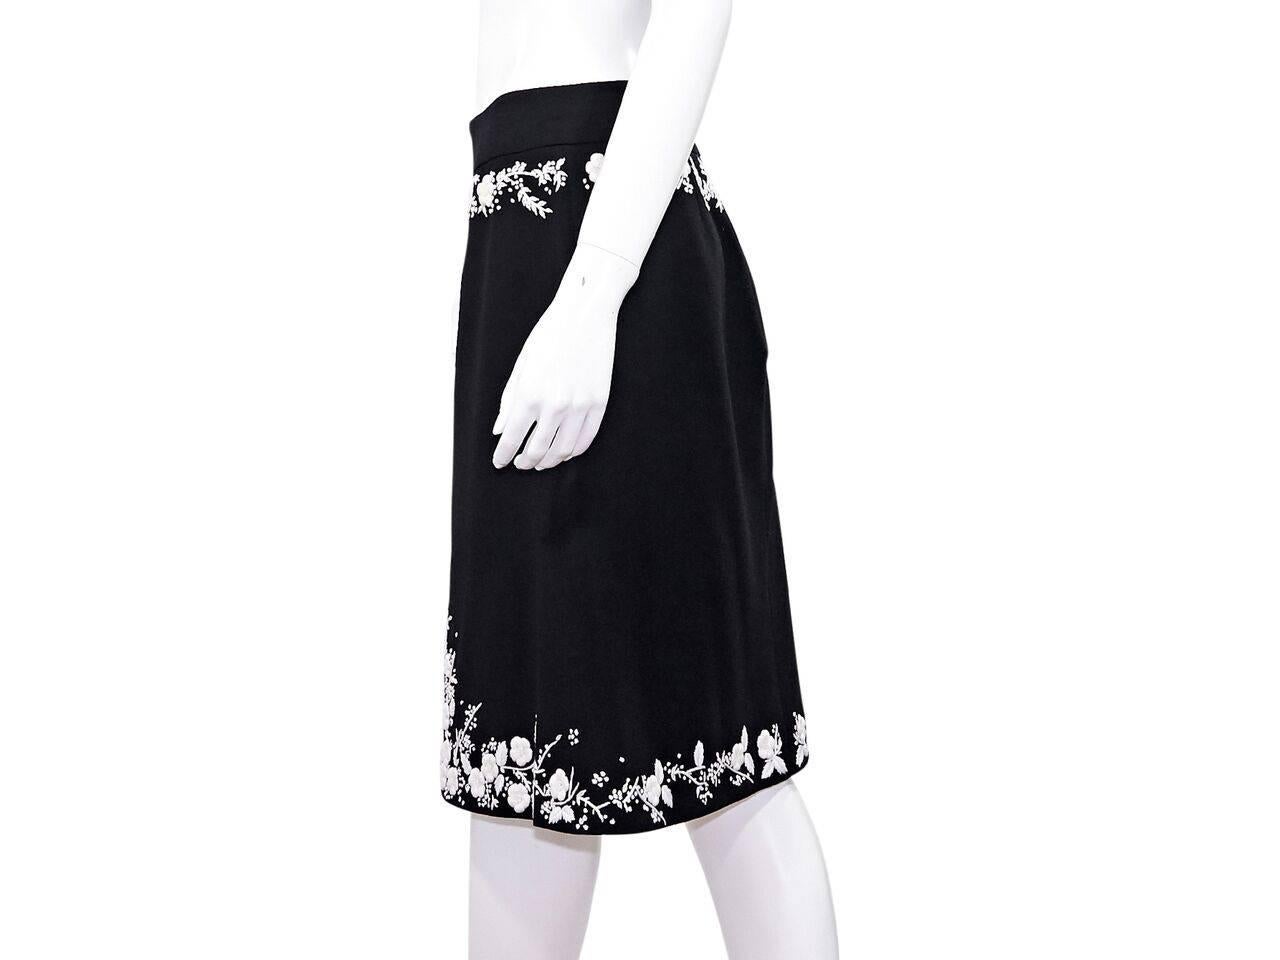 Product details:  Black and white embroidered A-line skirt by Alexander McQueen.  Banded waist.  Concealed back zip closure.  Label size IT 42.  
Condition: Pre-owned. Very good.
Est. Retail $ 695.00